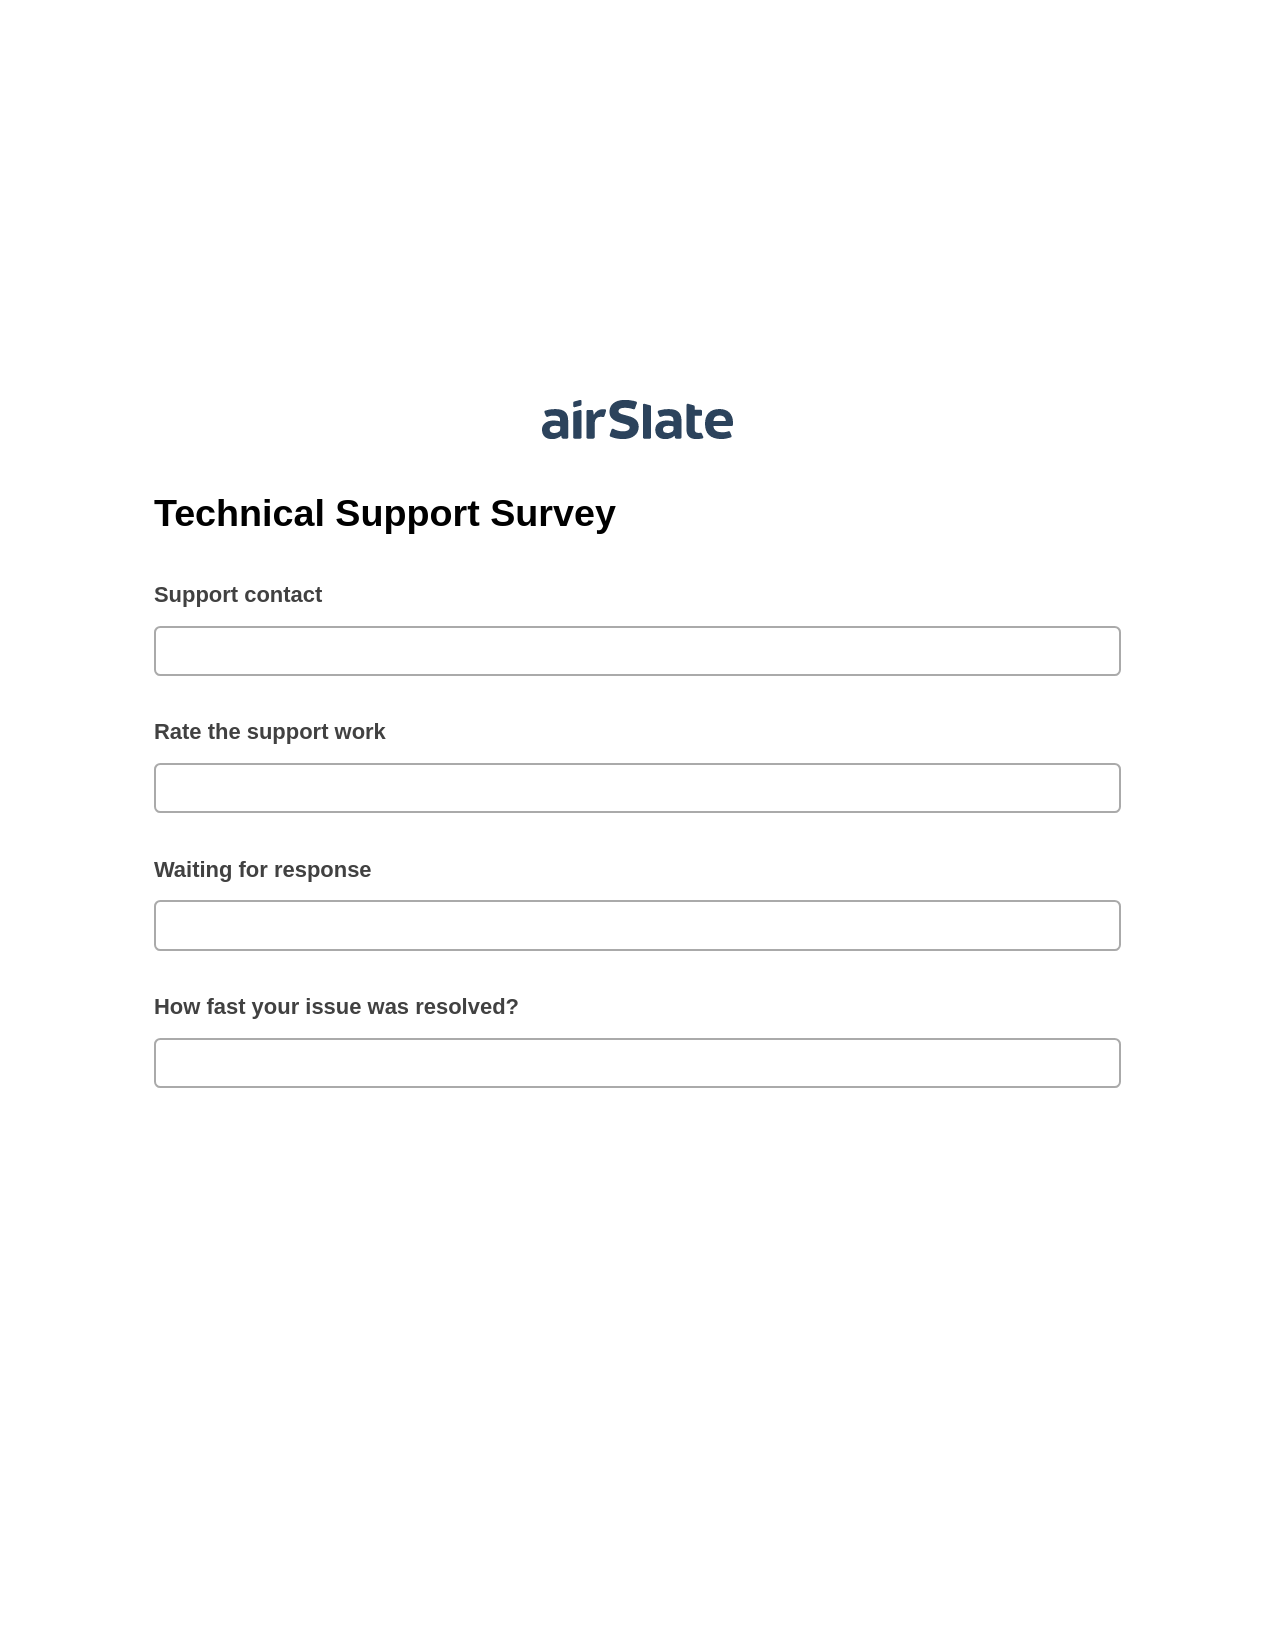 Multirole Technical Support Survey Pre-fill from Salesforce Records Bot, Create QuickBooks Invoice Bot, Export to WebMerge Bot